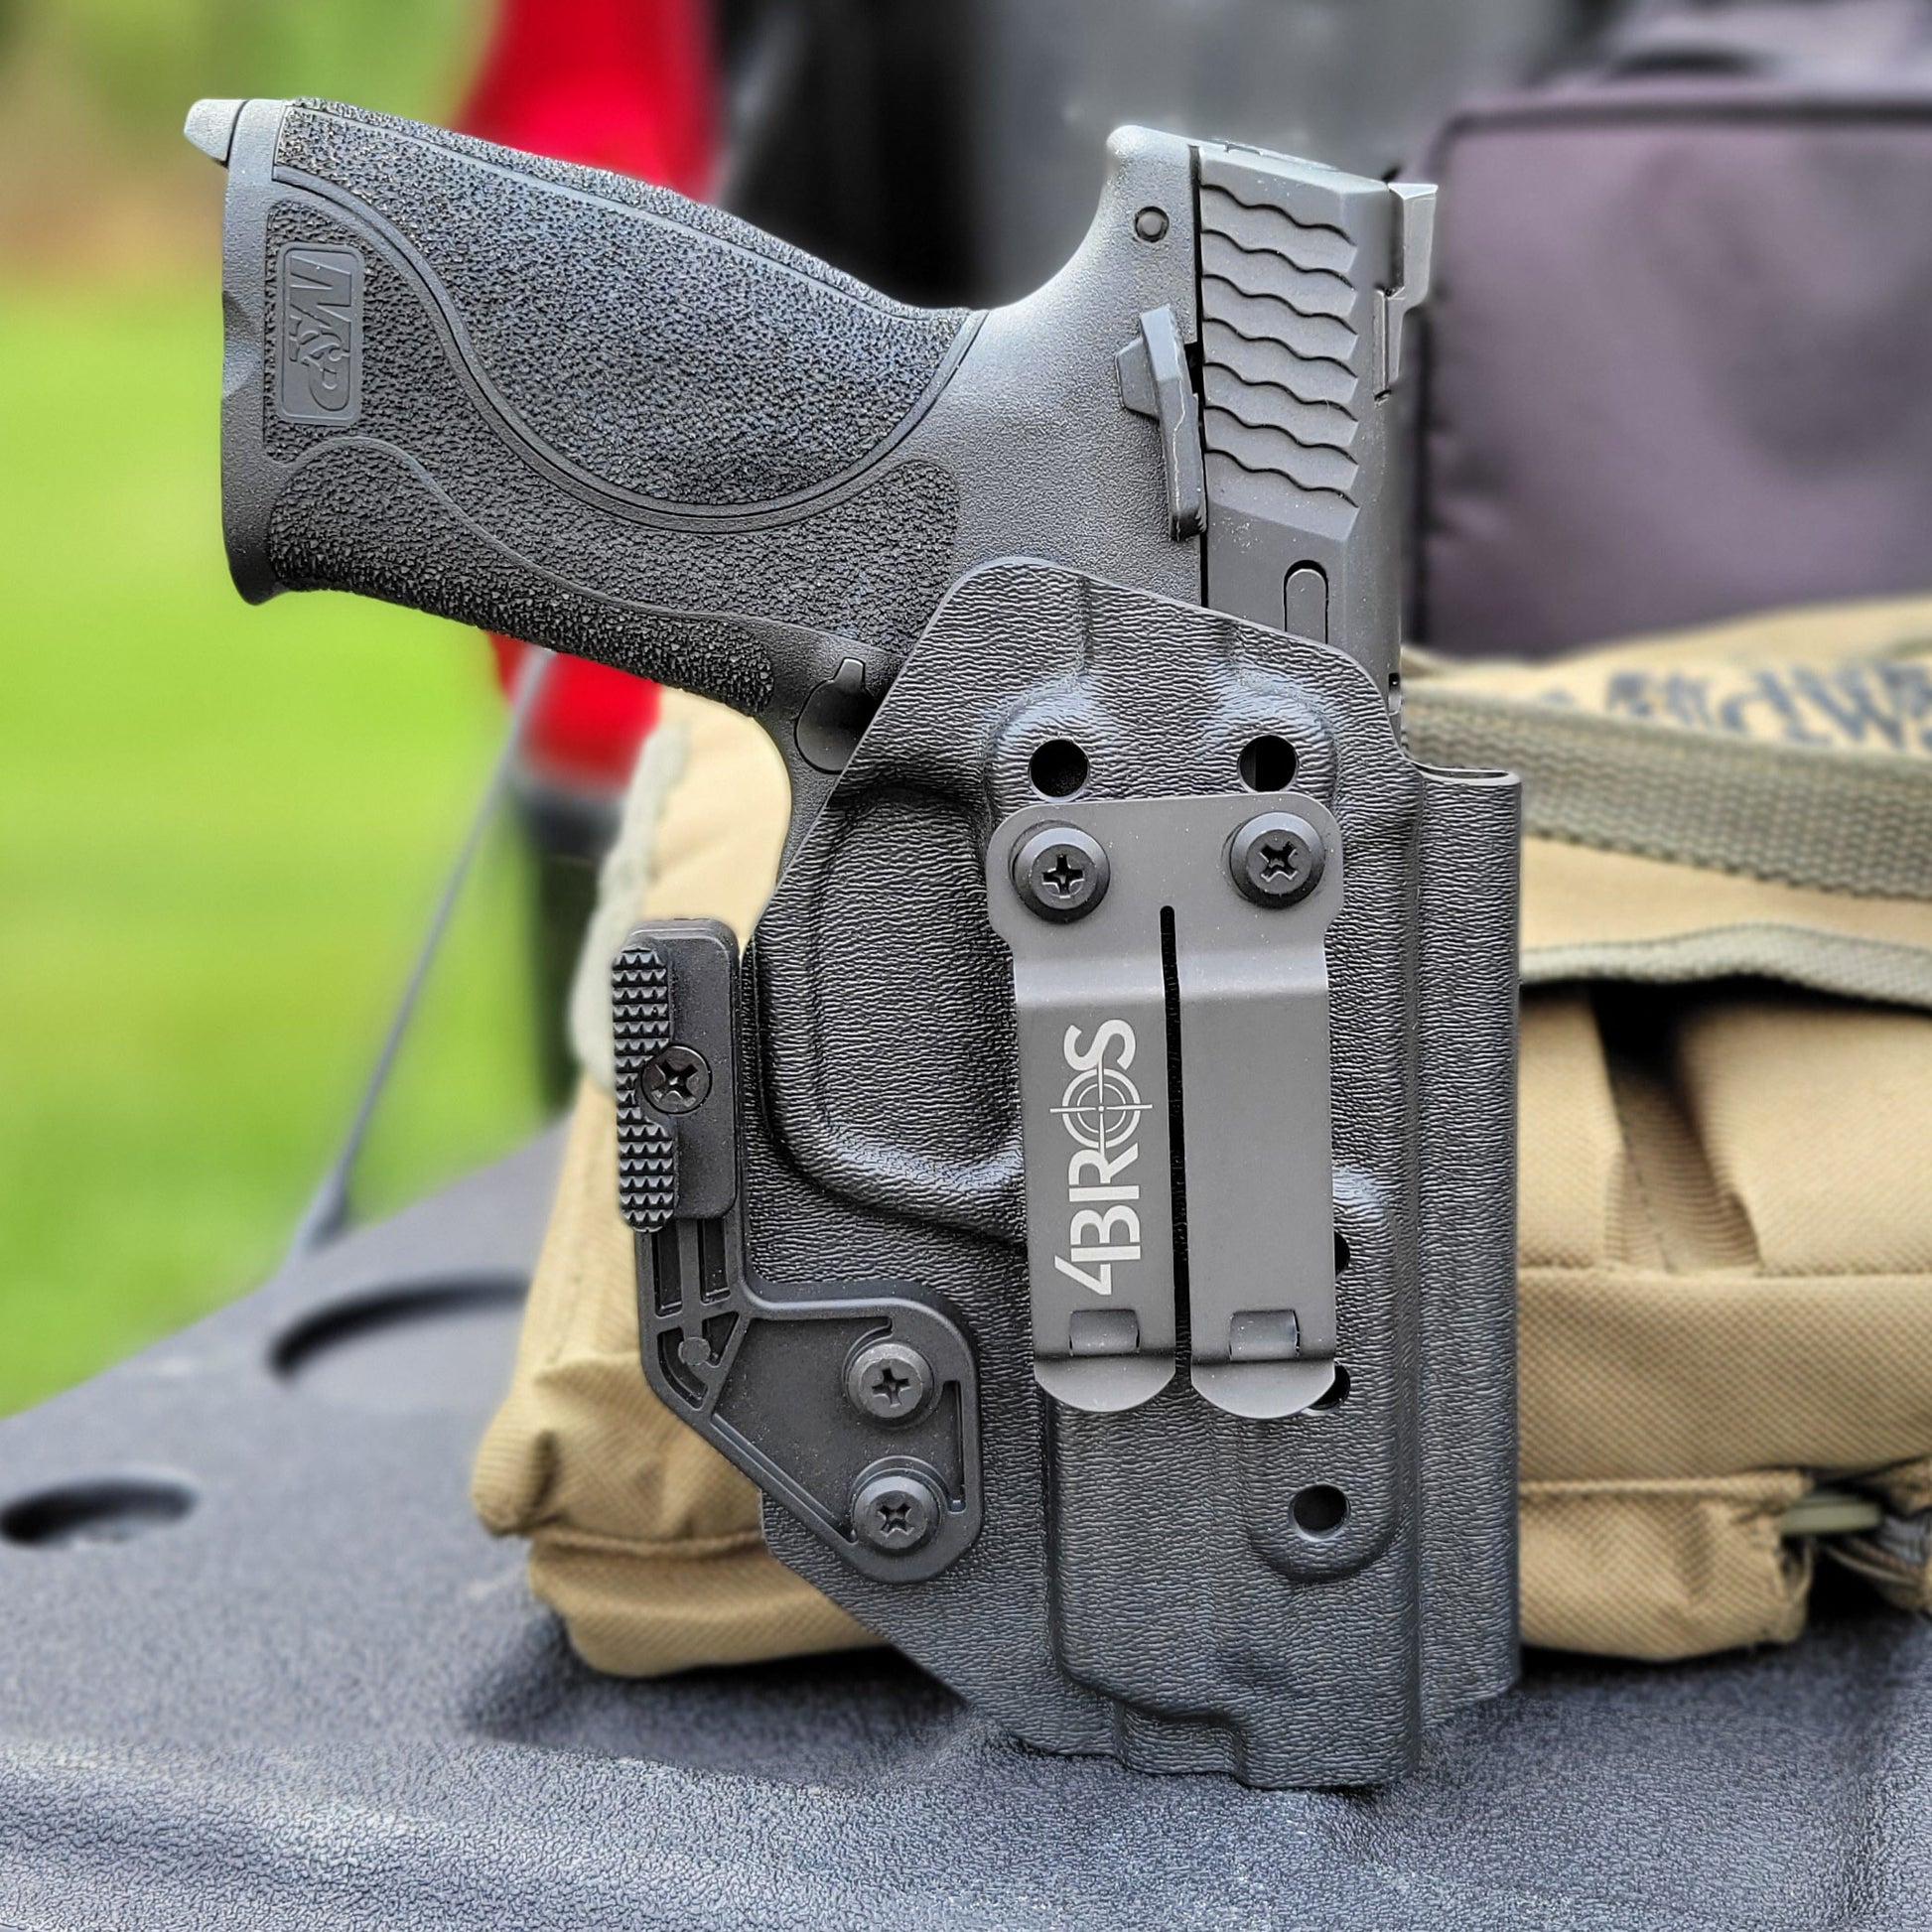 For the best Inside Waistband Kydex Taco Style Holster designed to fit the Smith and Wesson M&P 1.0 & 2.0 9MM and 40 S&W 4.25" pistol with or without thumb safety, shop Four Brothers Holster.   Full sweat guard, adjustable retention, cleared for a red dot sight. Proudly made in the USA for veterans & law enforcement. 